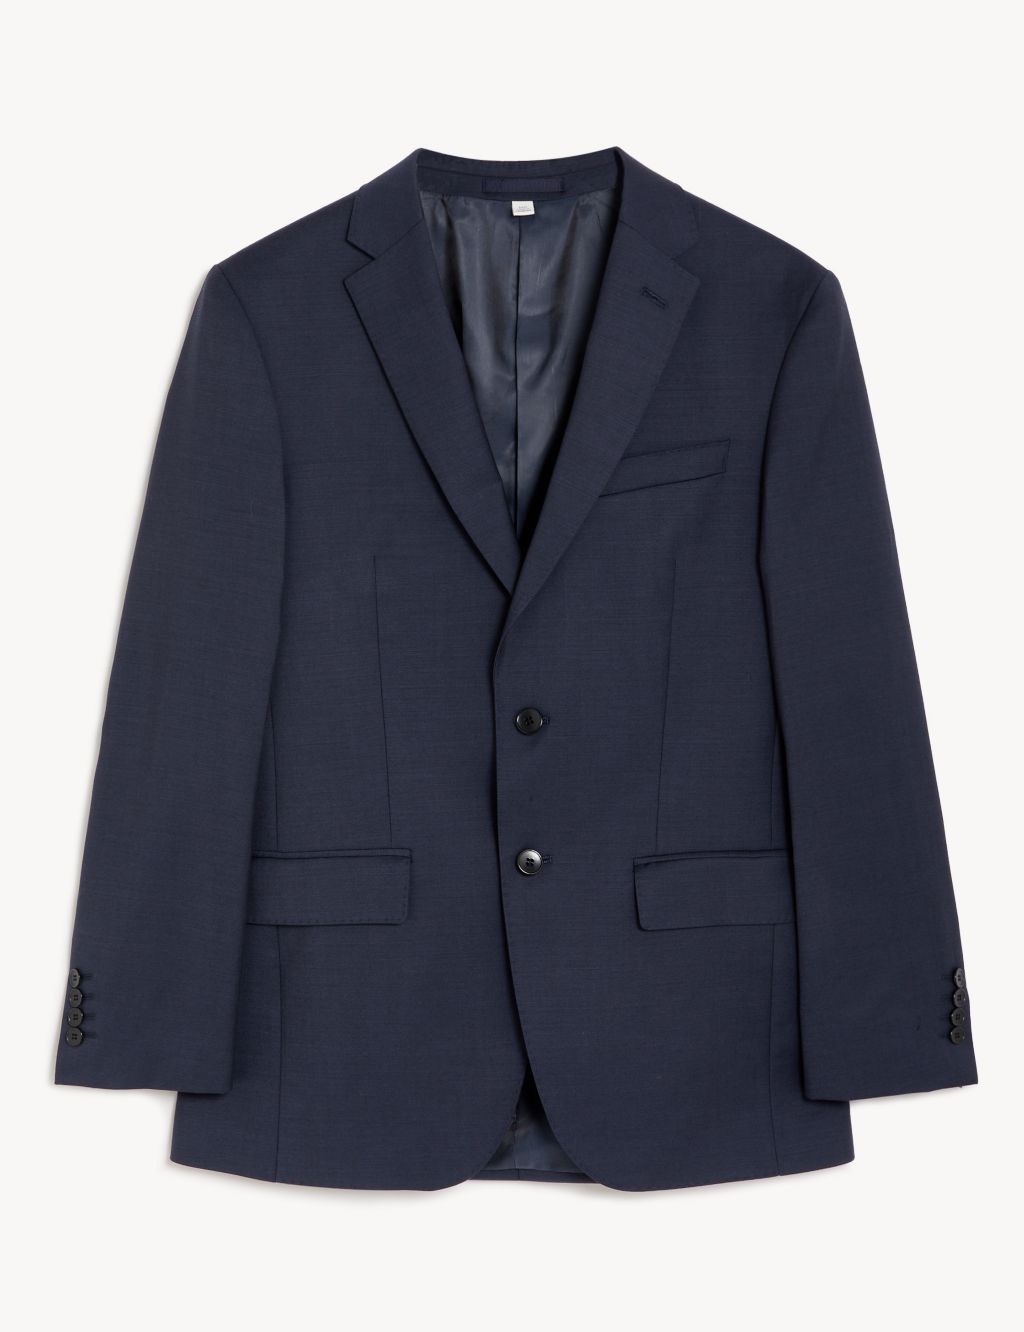 Tailored Fit Pure Wool Twill Suit Jacket image 2